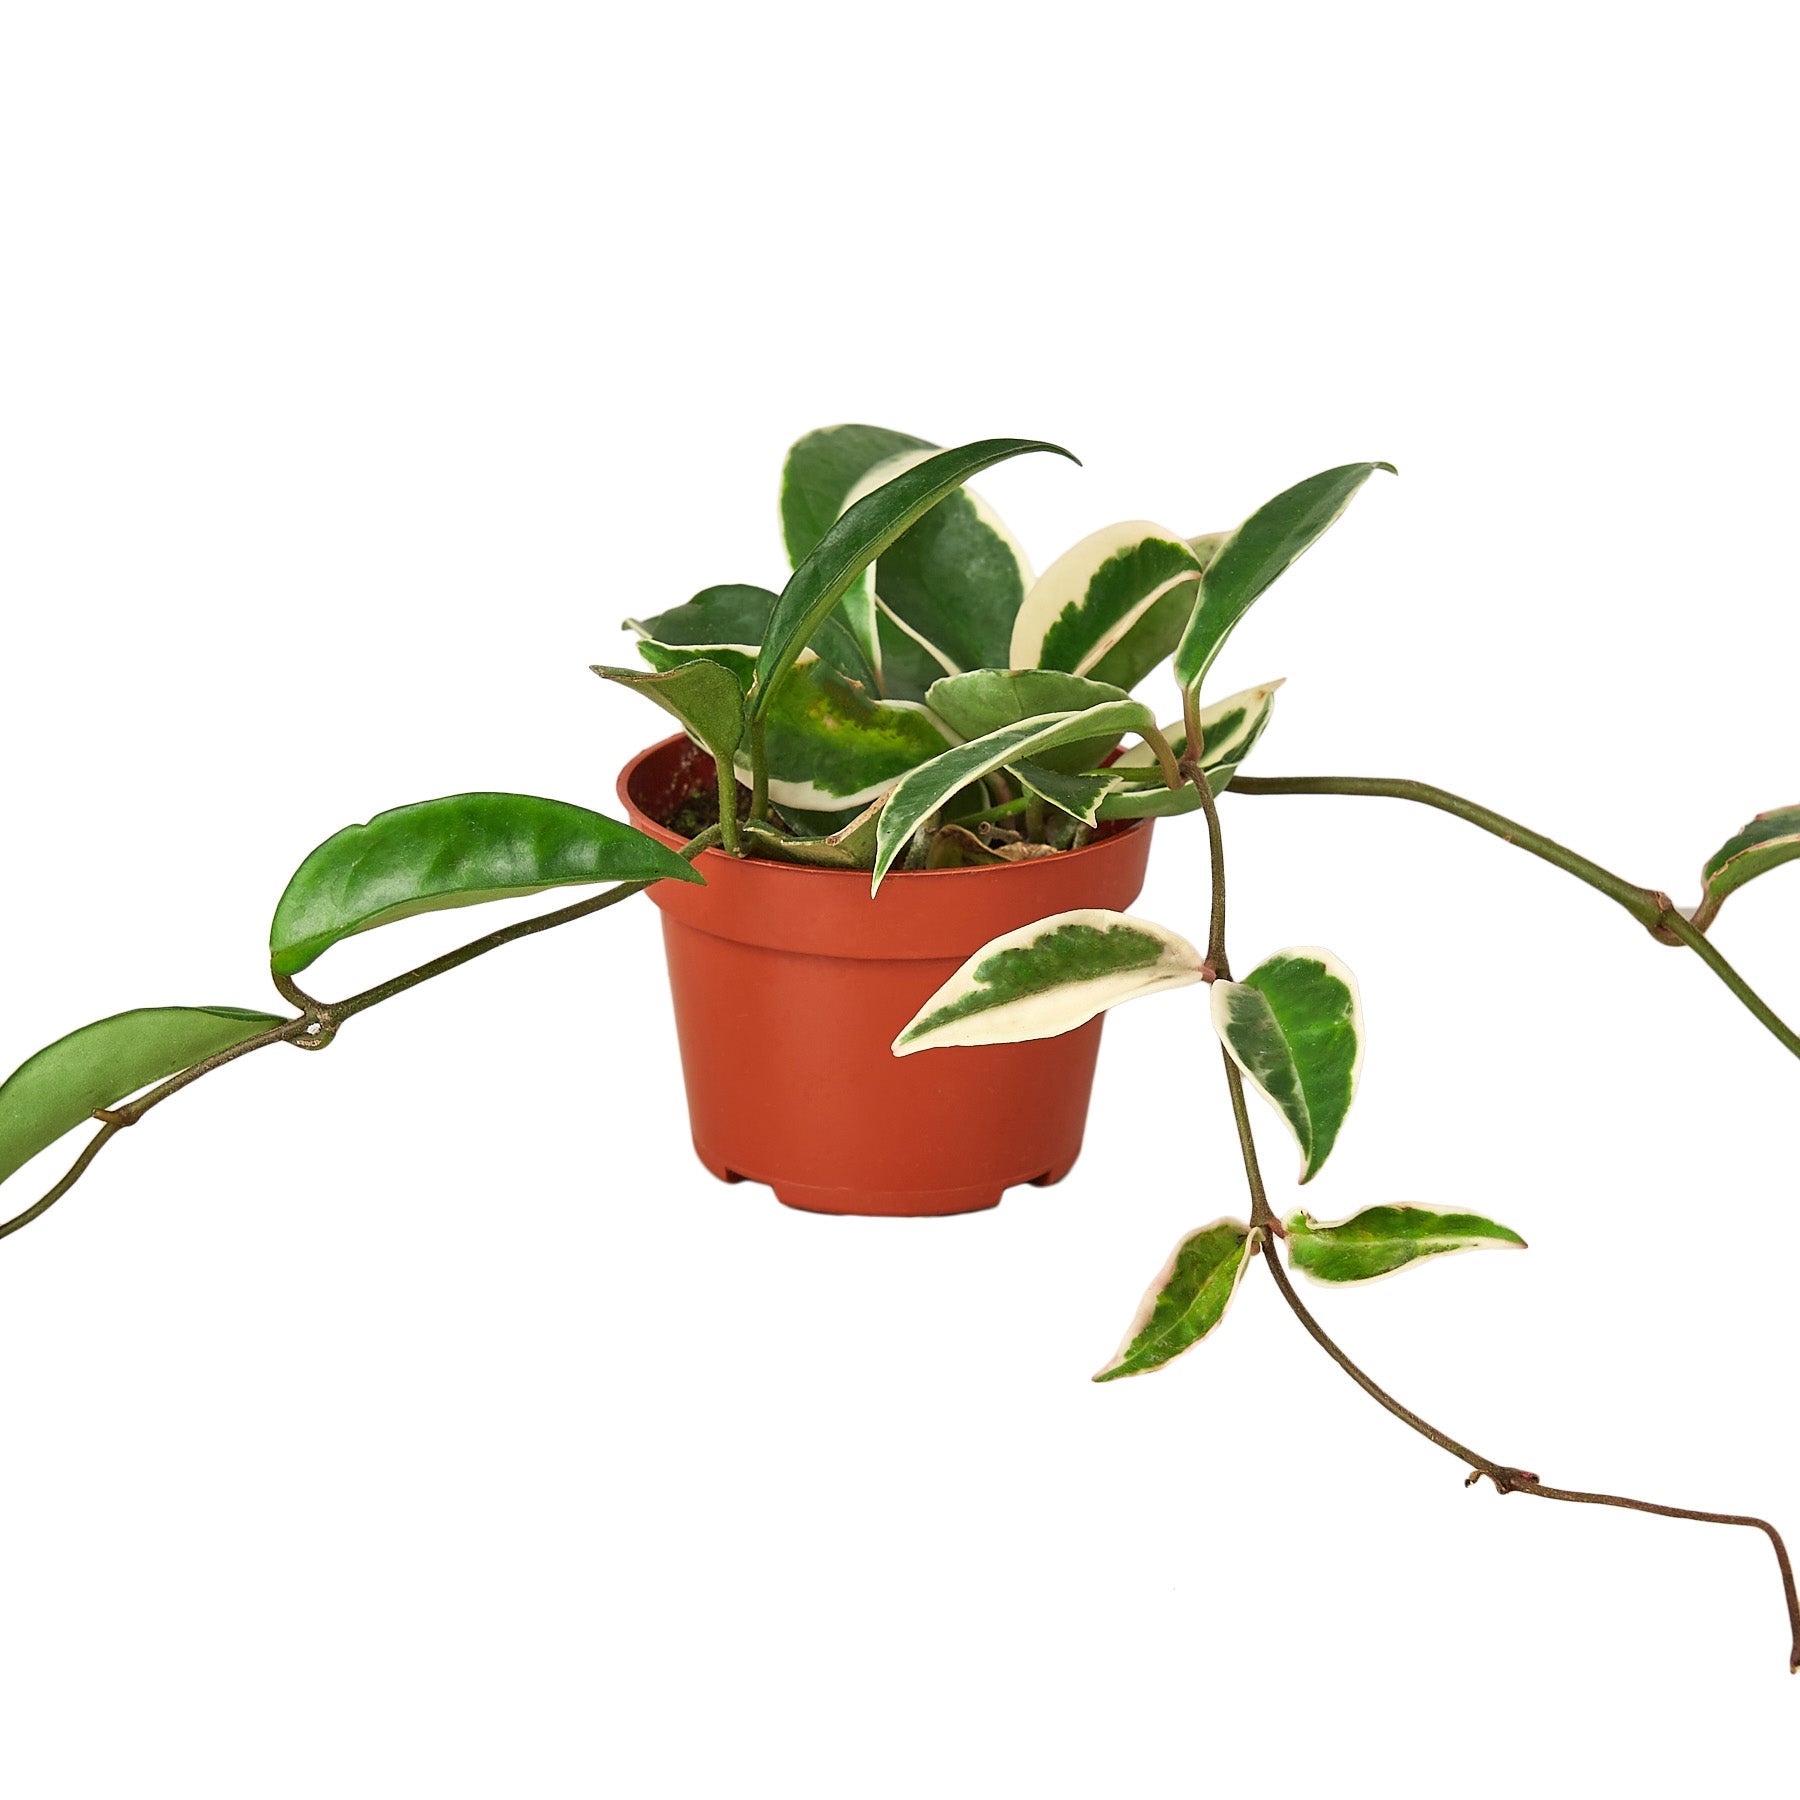 A plant in a pot on a white background at the best garden nursery near me.